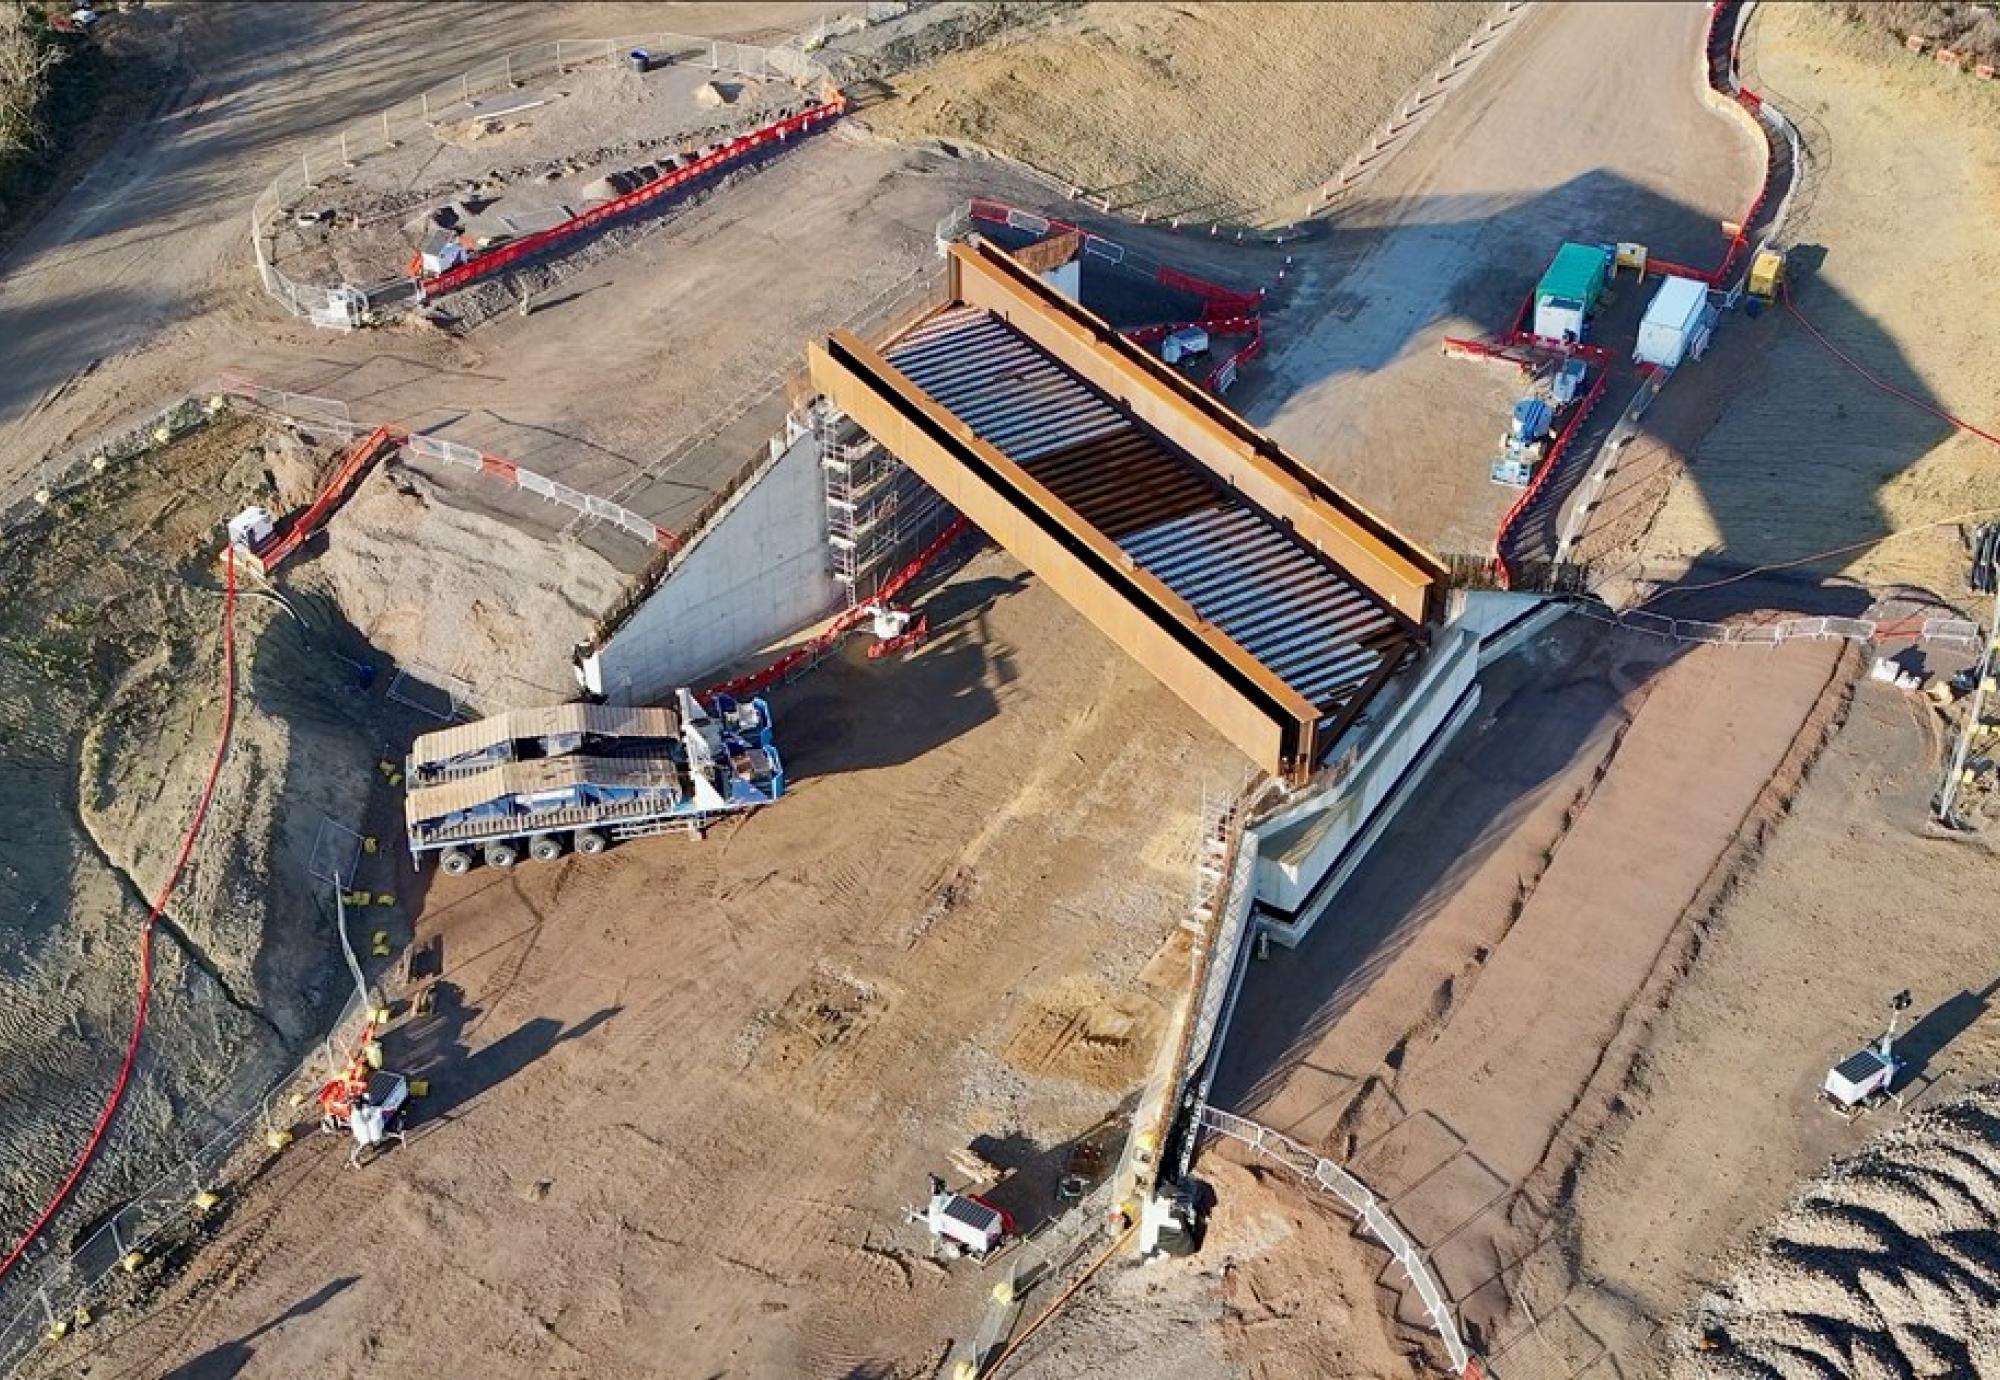 East West Rail bridge lifted into place by HS2 engineers in Calvert, via HS2 